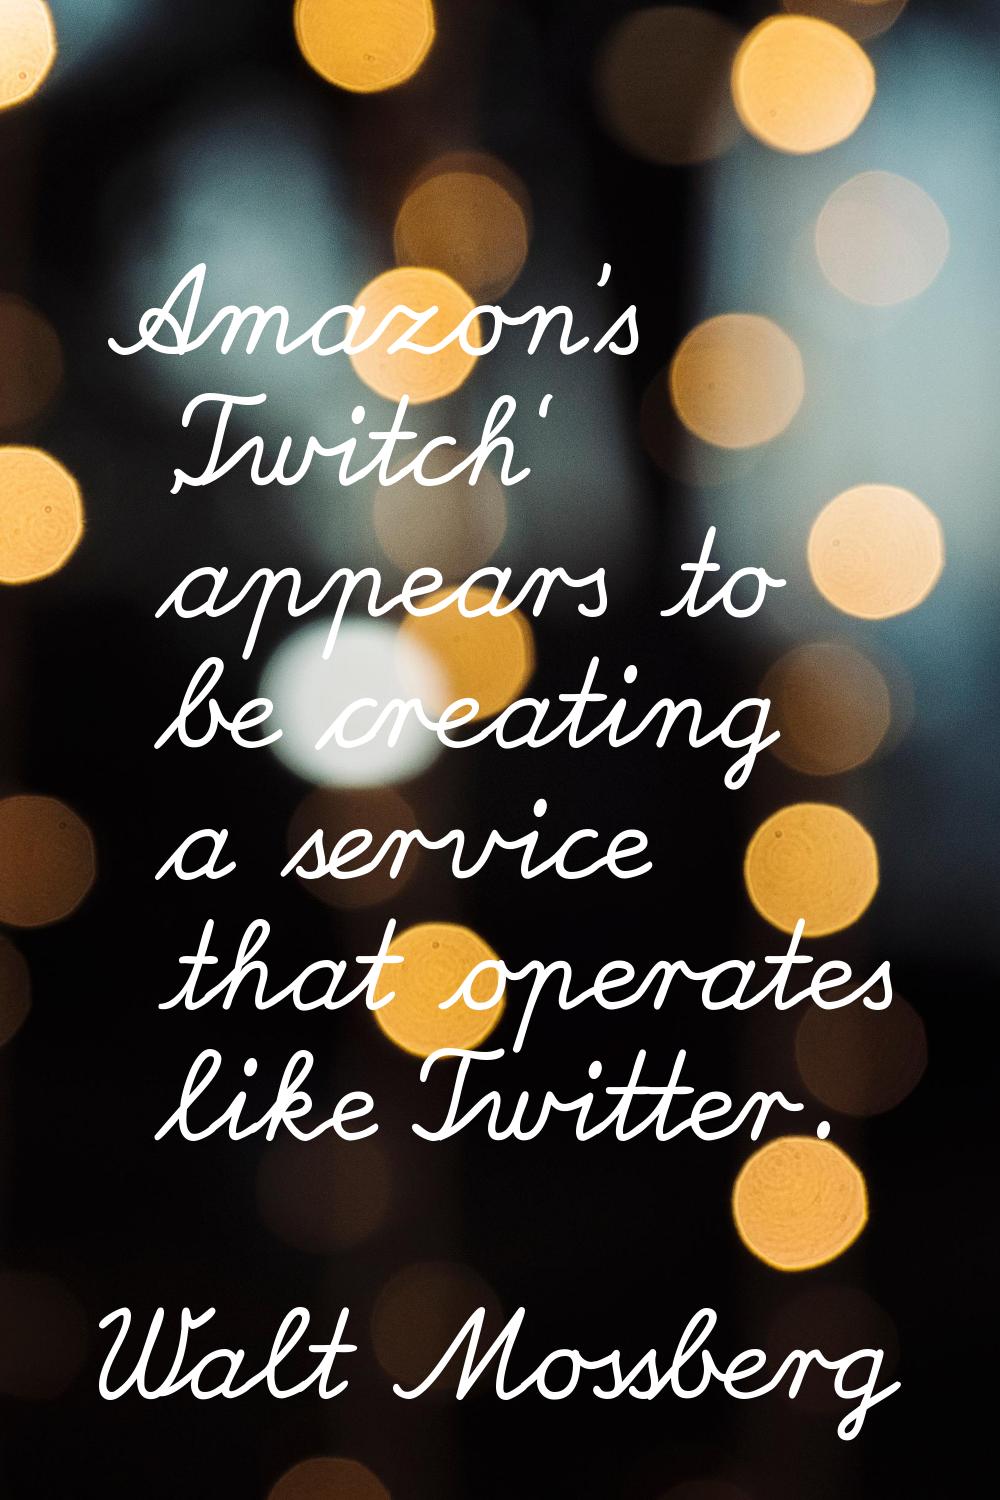 Amazon's 'Twitch' appears to be creating a service that operates like Twitter.